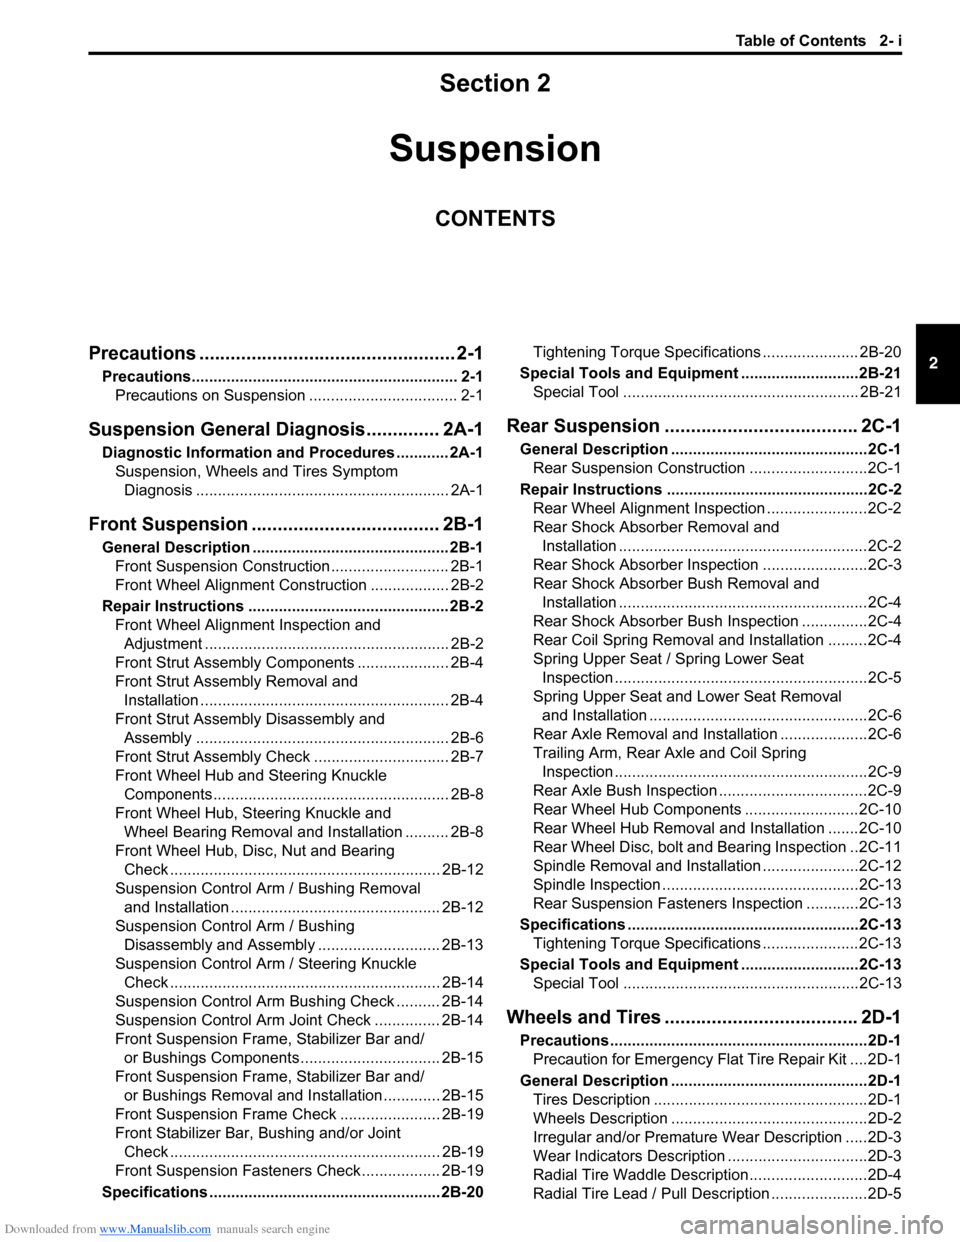 SUZUKI SWIFT 2007 2.G Service Service Manual Downloaded from www.Manualslib.com manuals search engine Table of Contents 2- i
2
Section 2
CONTENTS
Suspension
Precautions ................................................. 2-1
Precautions...........